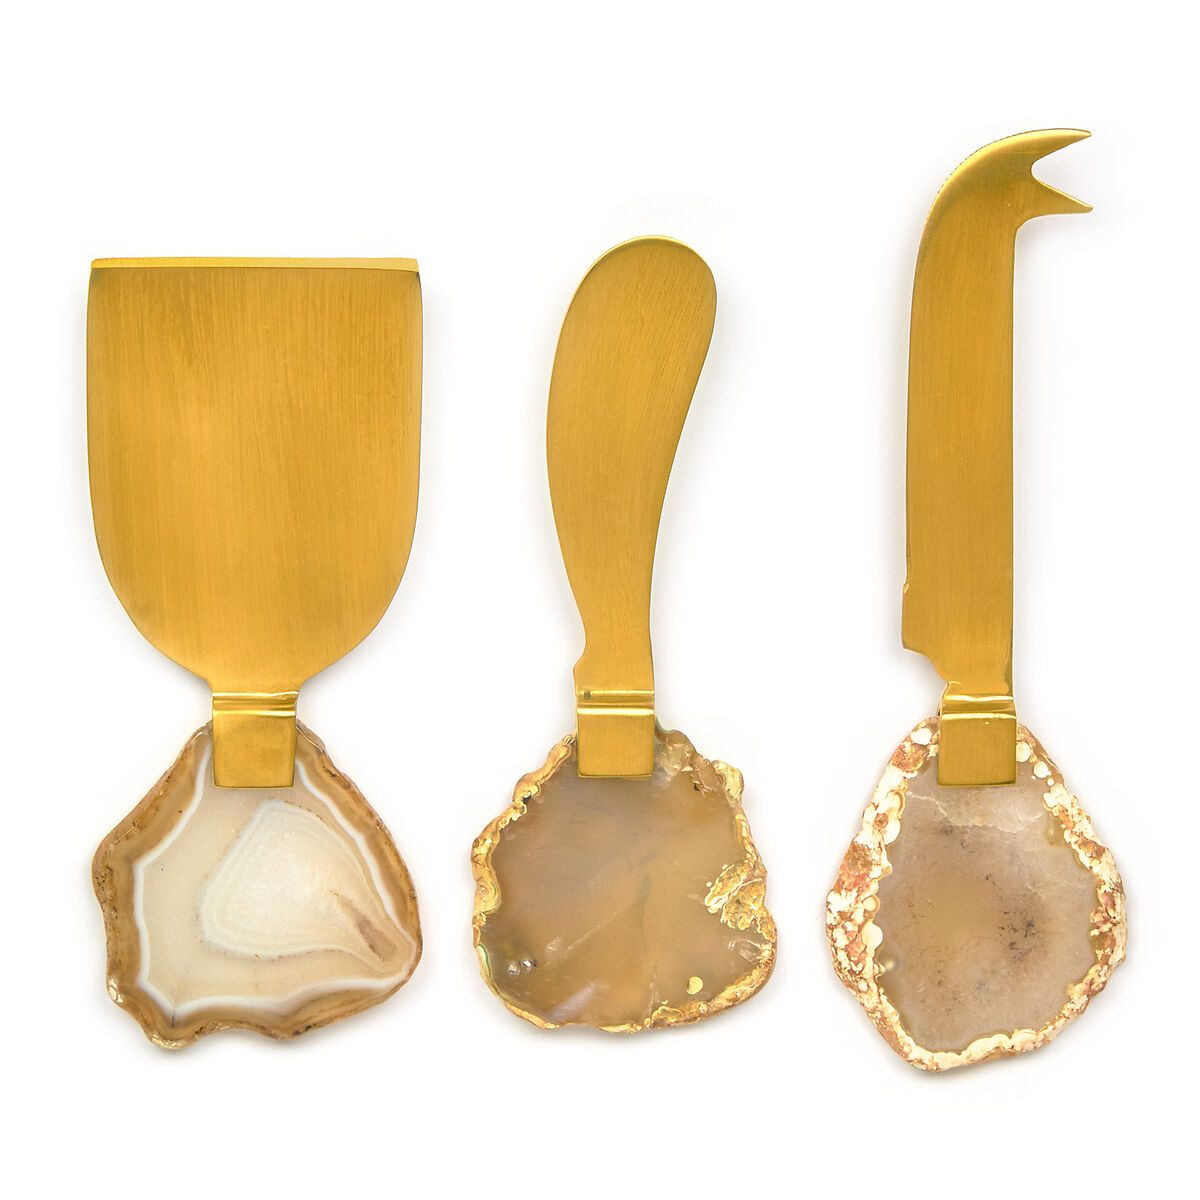 Set of 3 Natural Agate Cheese Knives | Ross-Simons